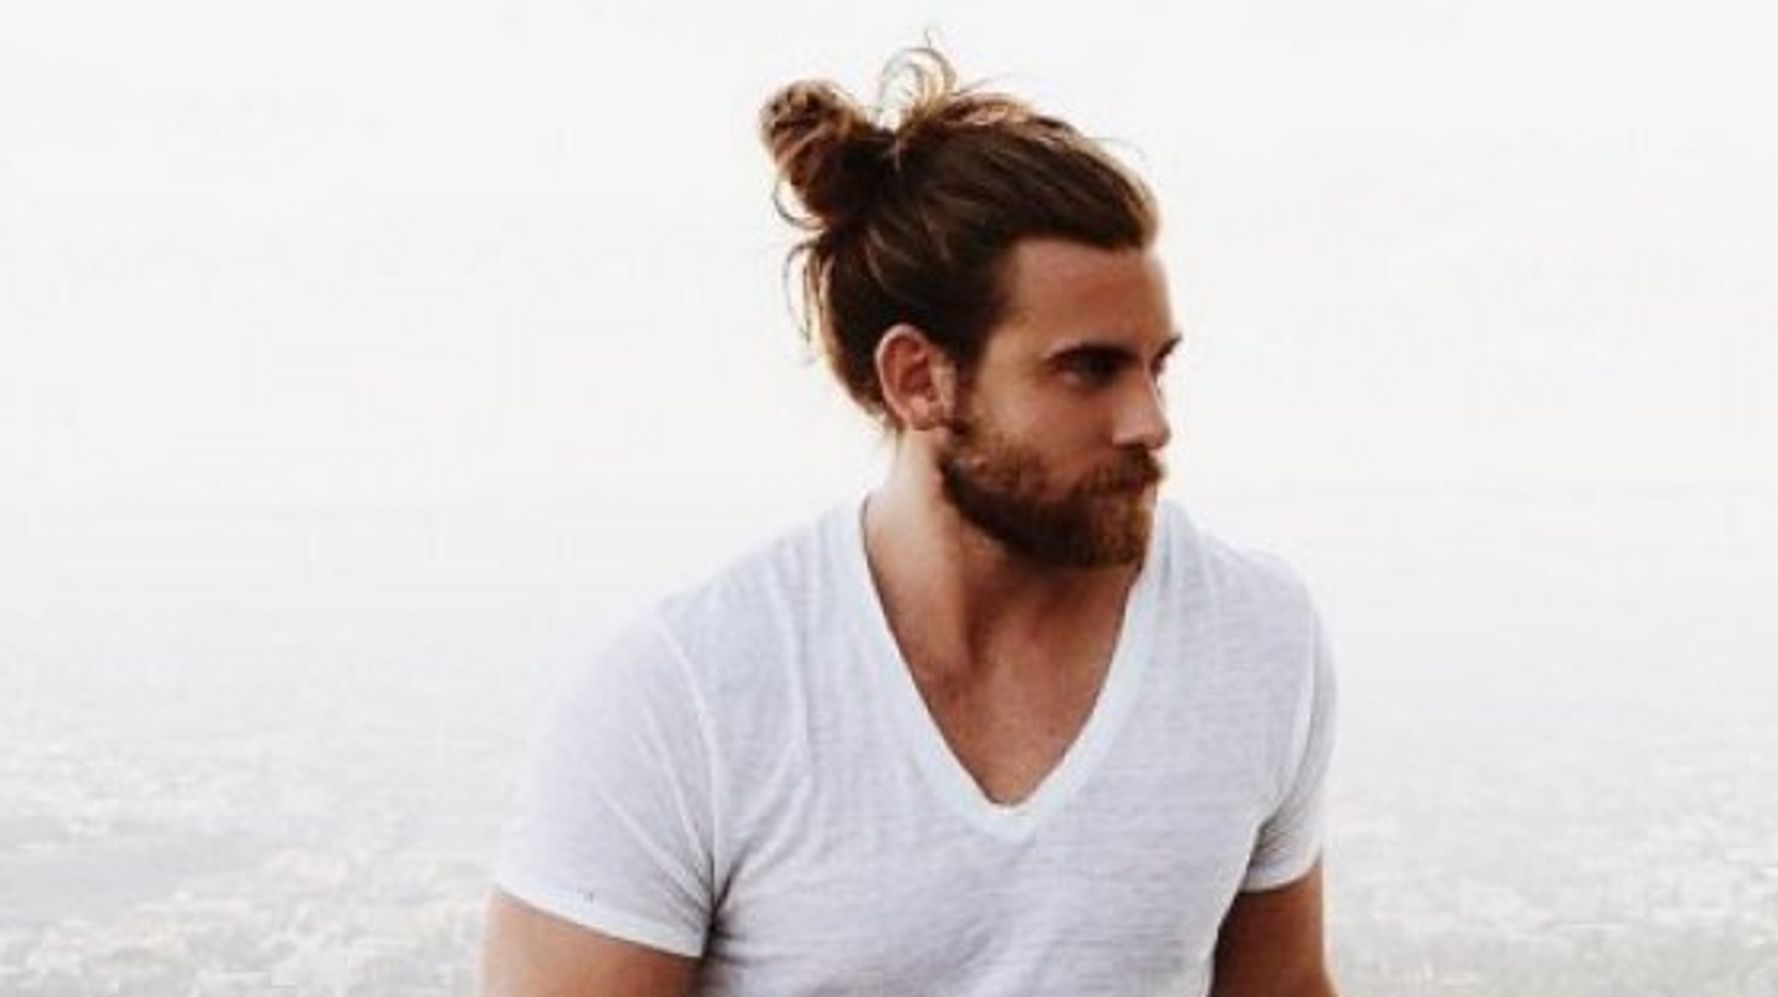 Thanks to the man bun, there are now more Google searches for